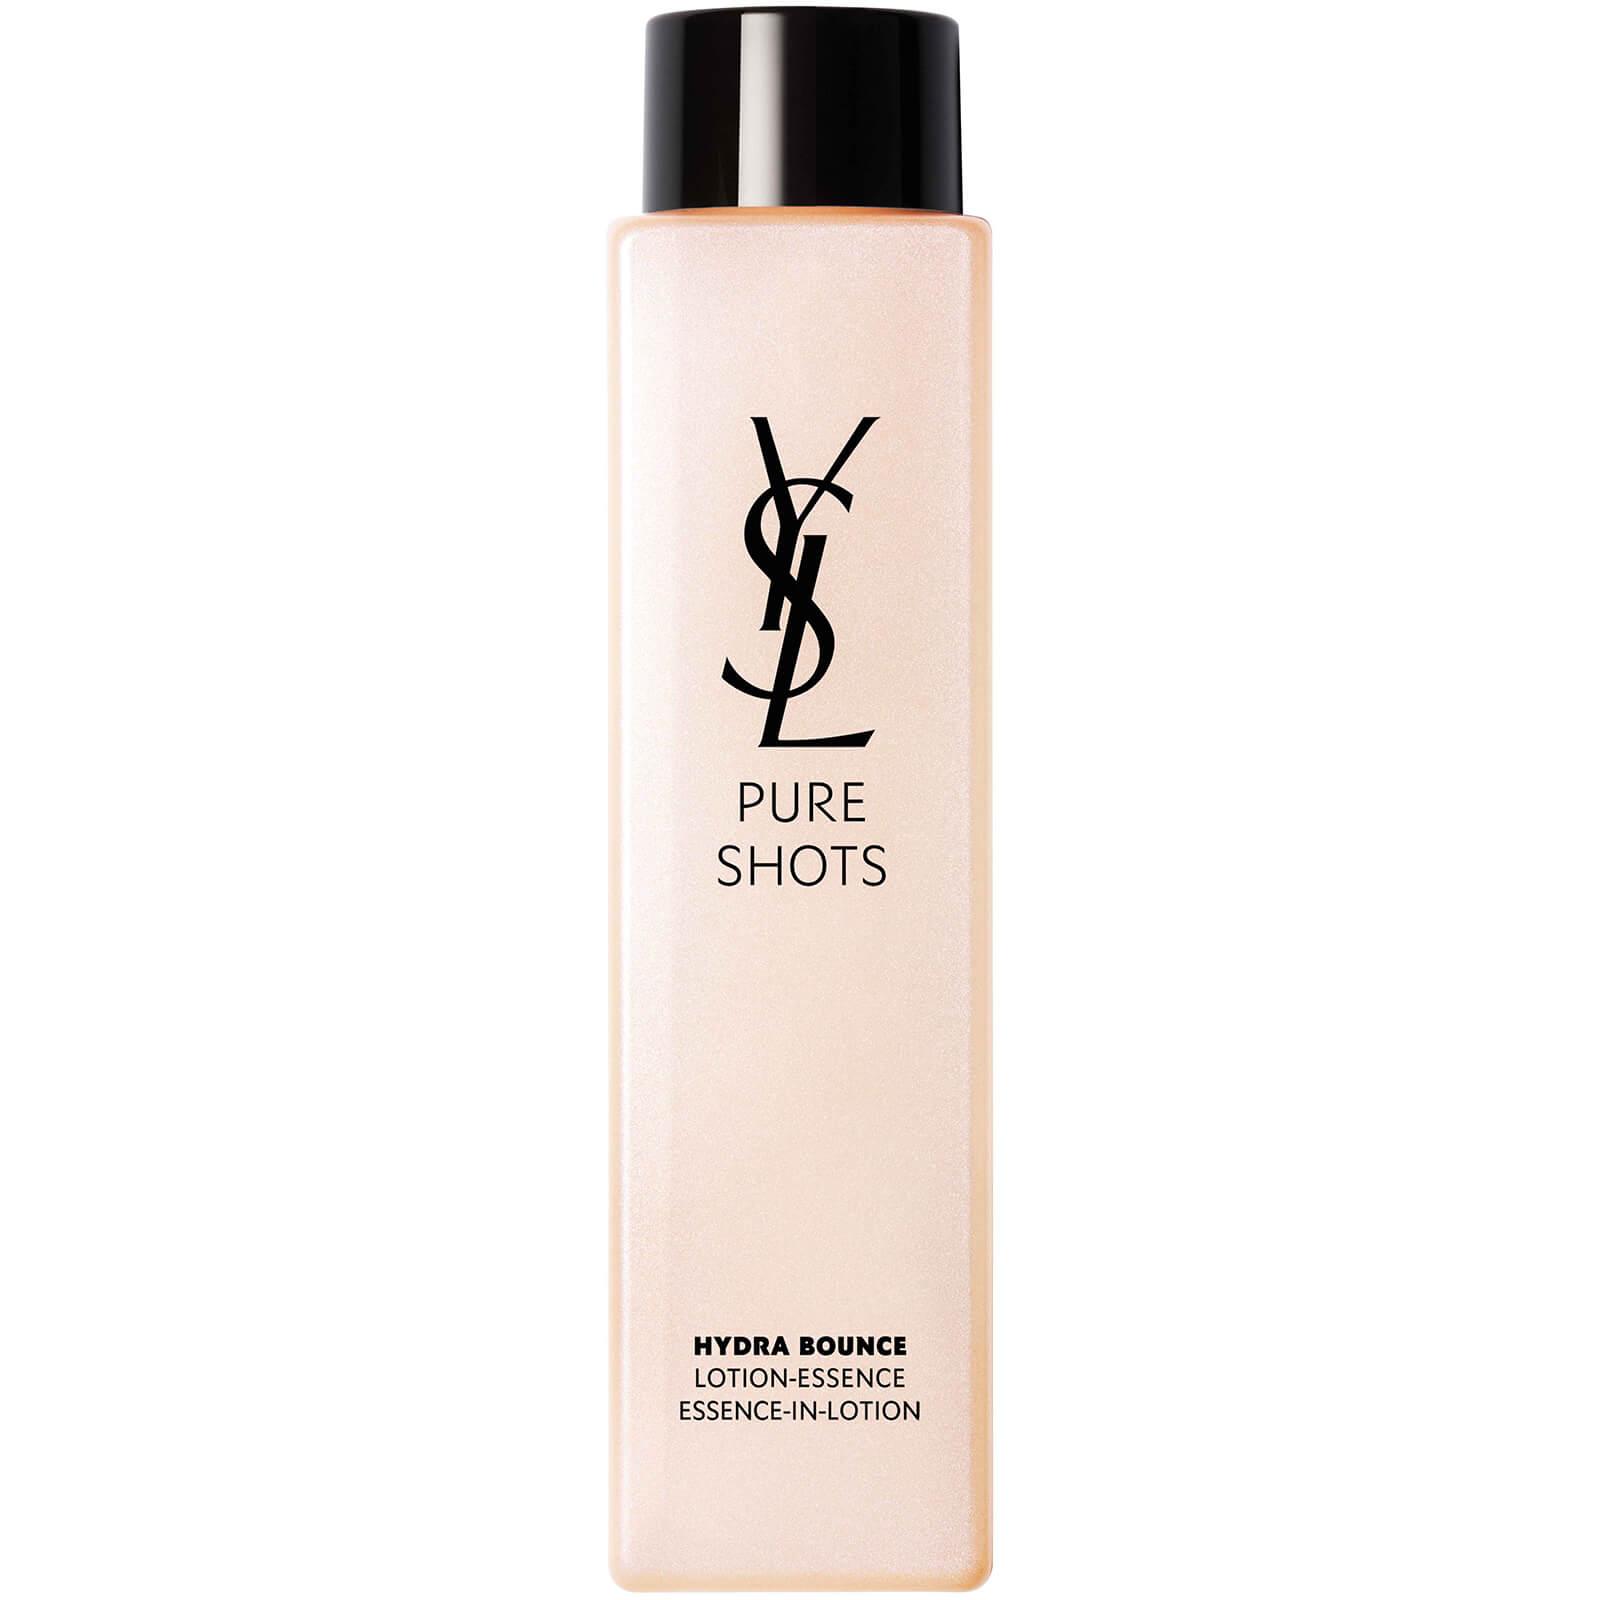 Pure Shots Hydra Bounce Essence-In-Lotion